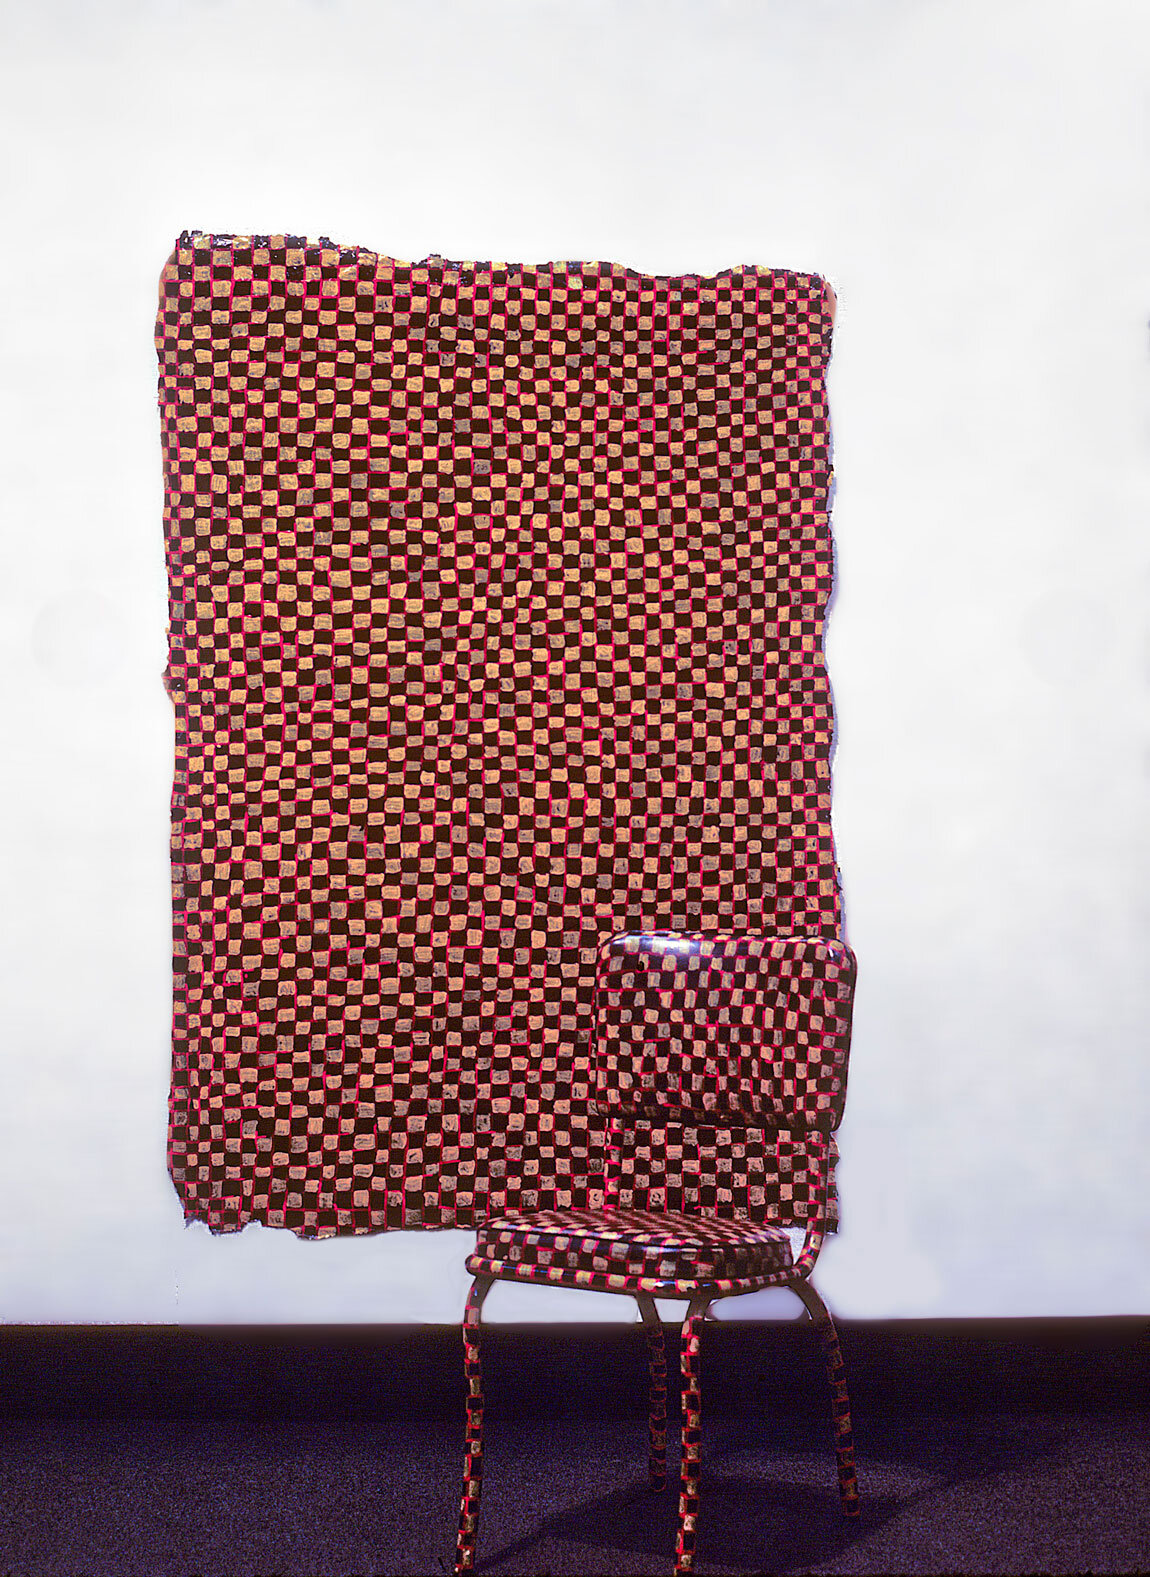   Matching Pieces , 1978, latex enamel, cheesecloth, gesso, and kitchen chair 65 x 43 inches 